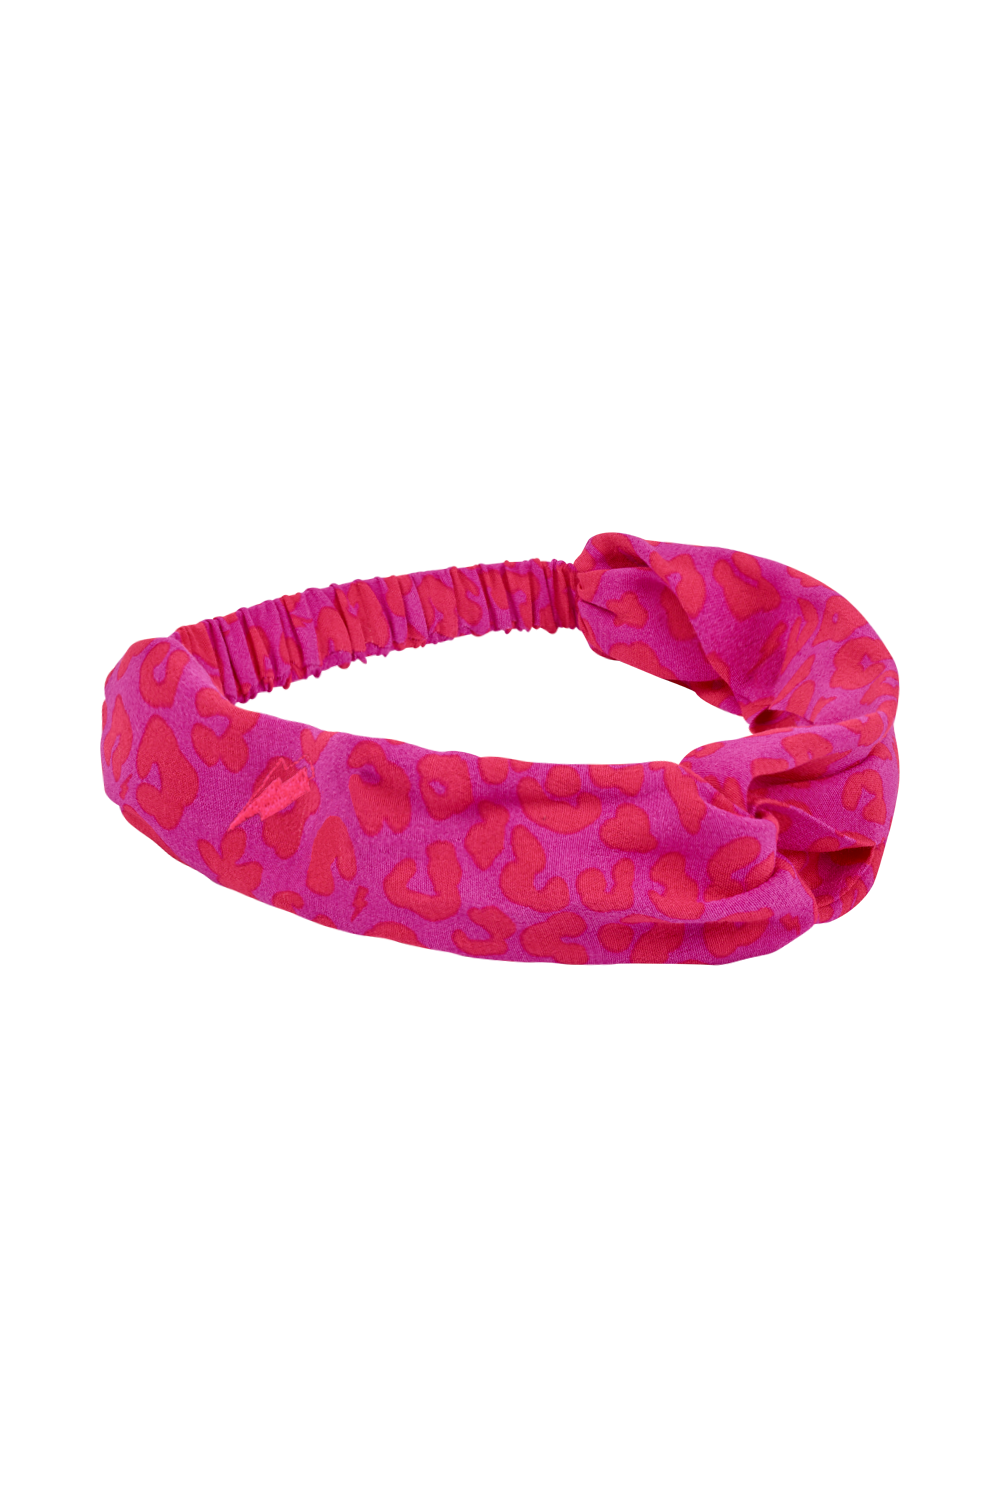 Magenta with Hot Pink Floral Leopard Headband